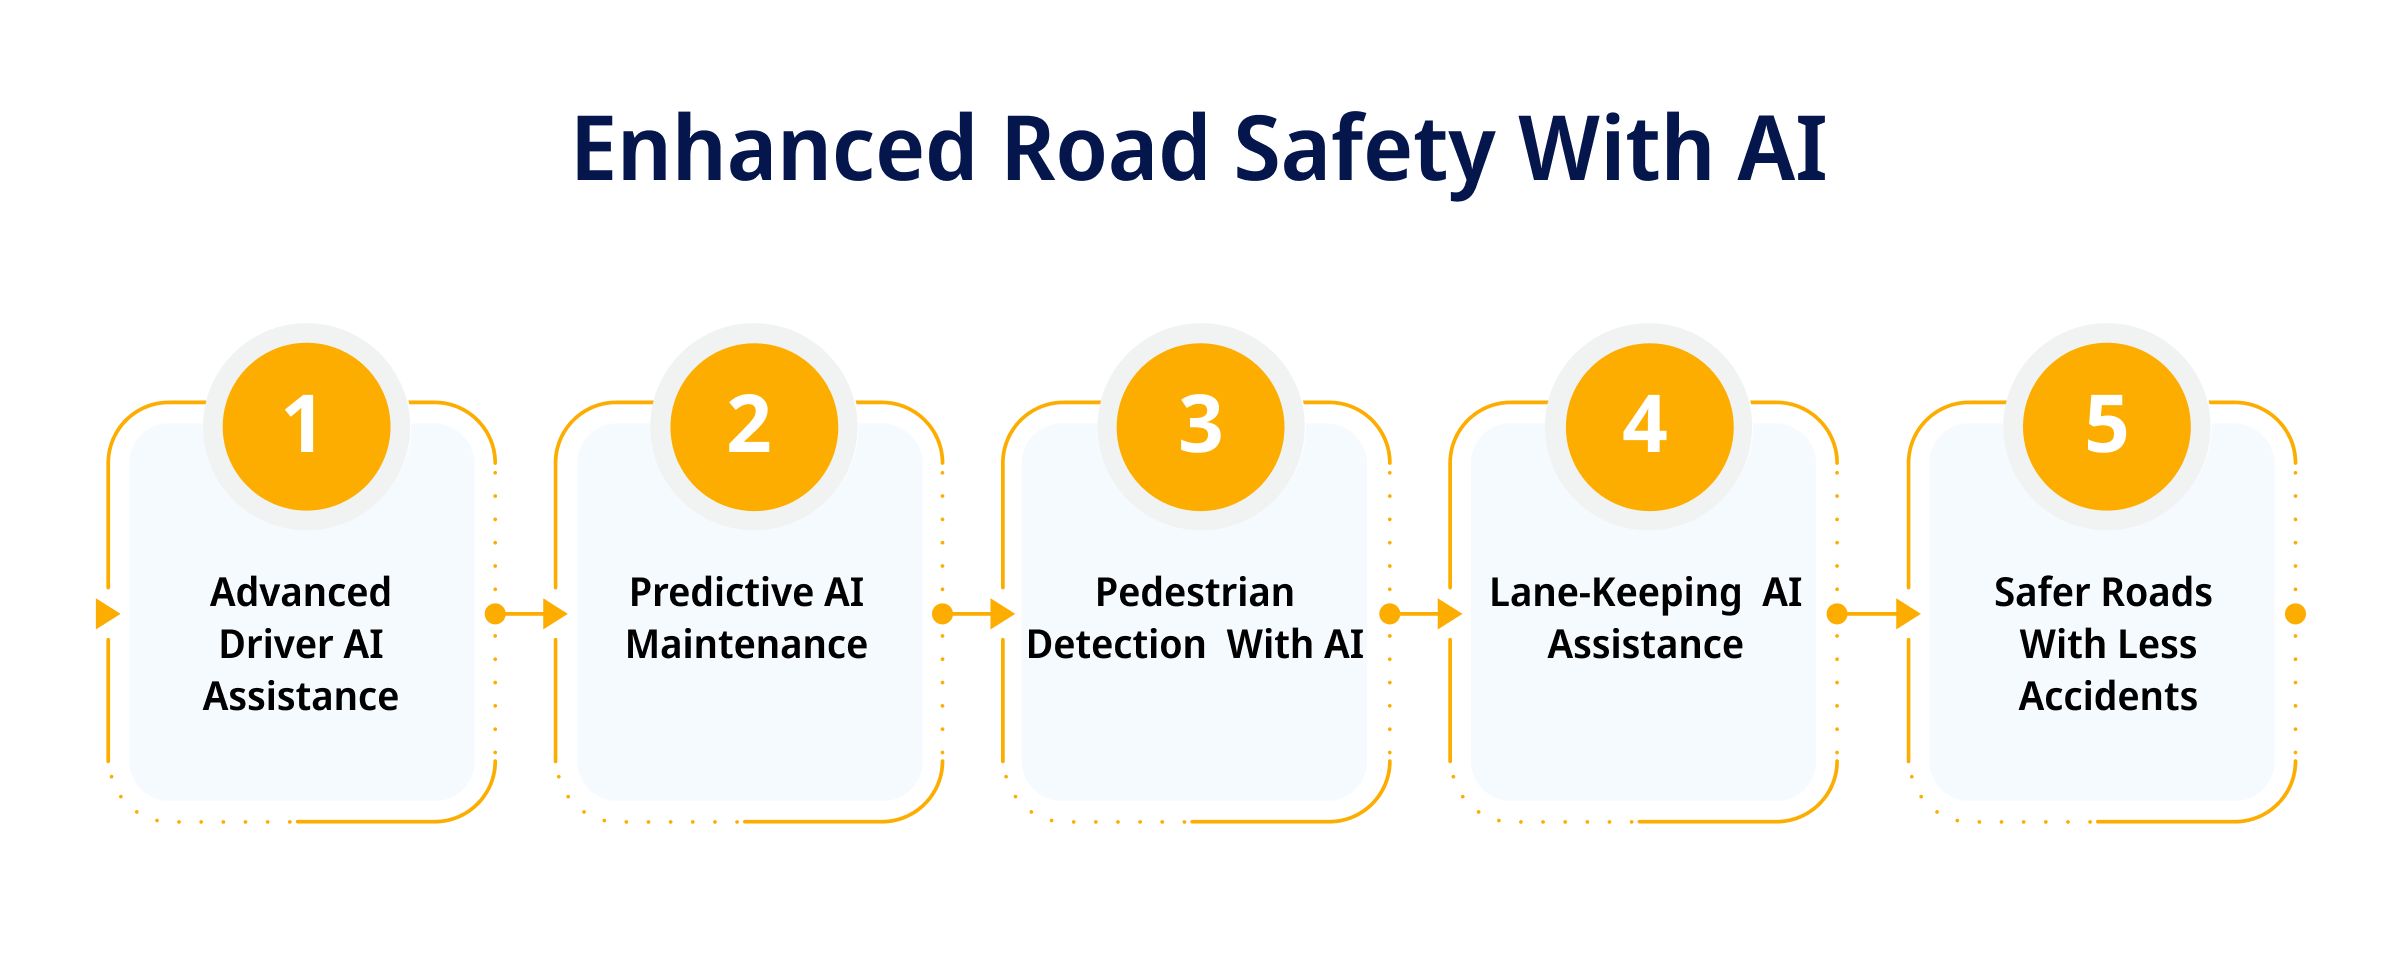 Enhanced Road Safety With AI